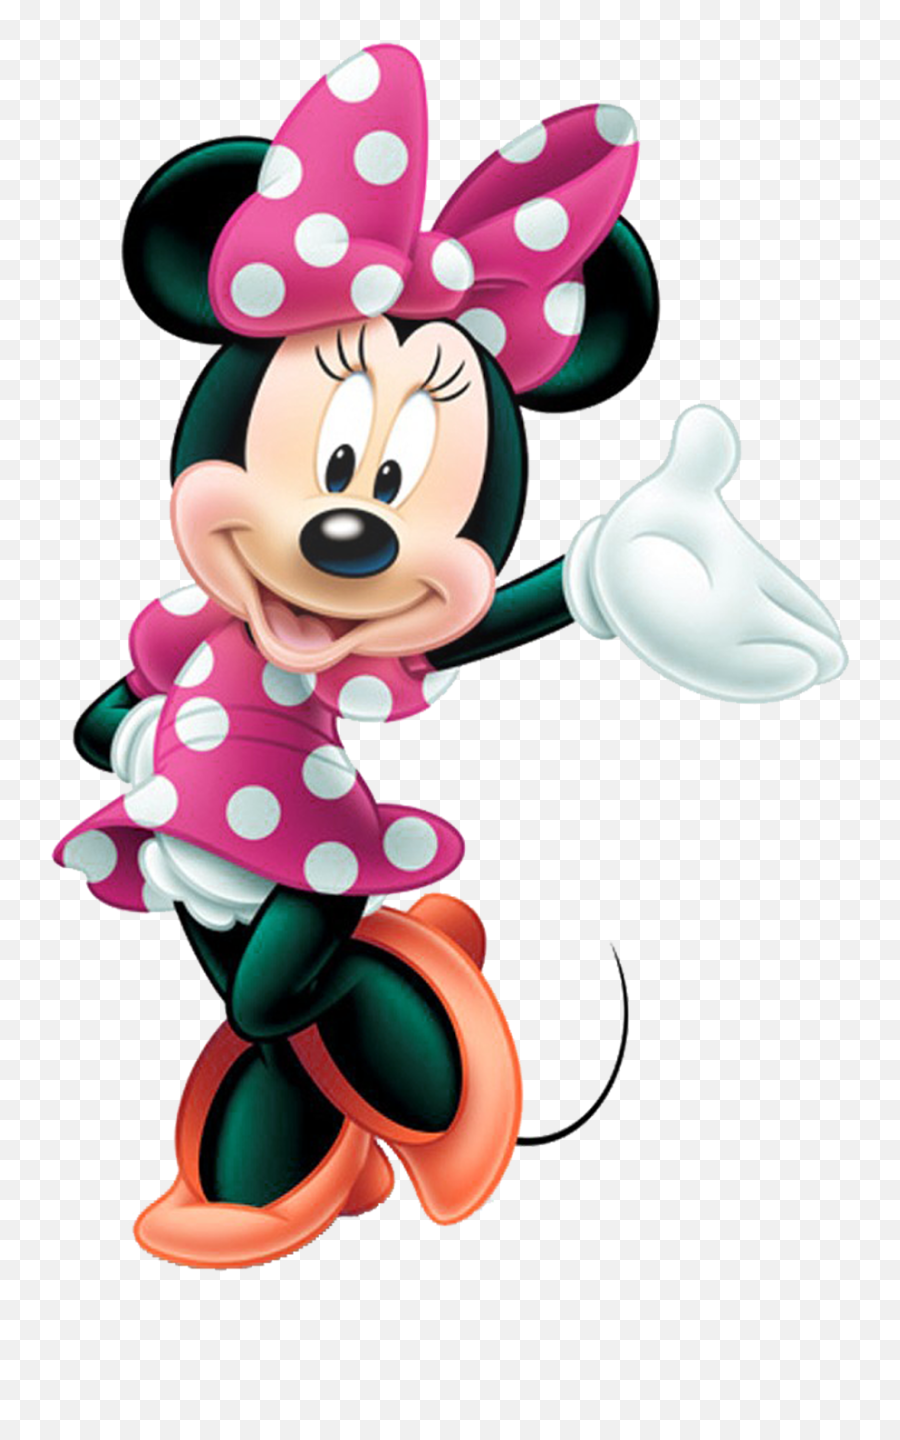 Mickey Mouse Minnie Free Hd Image - Minnie Png Emoji,Mickey Mouse Emoticon